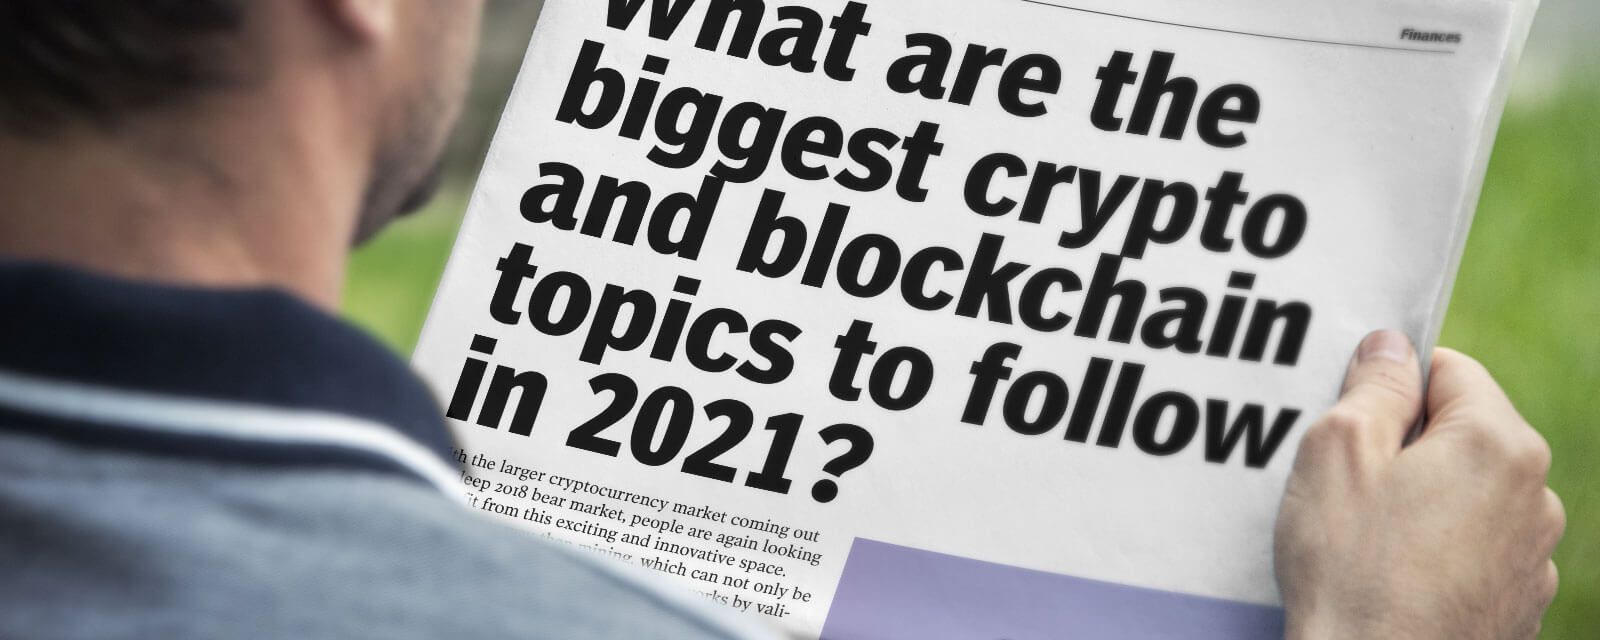 What are the biggest crypto and blockchain topics to follow in 2022?